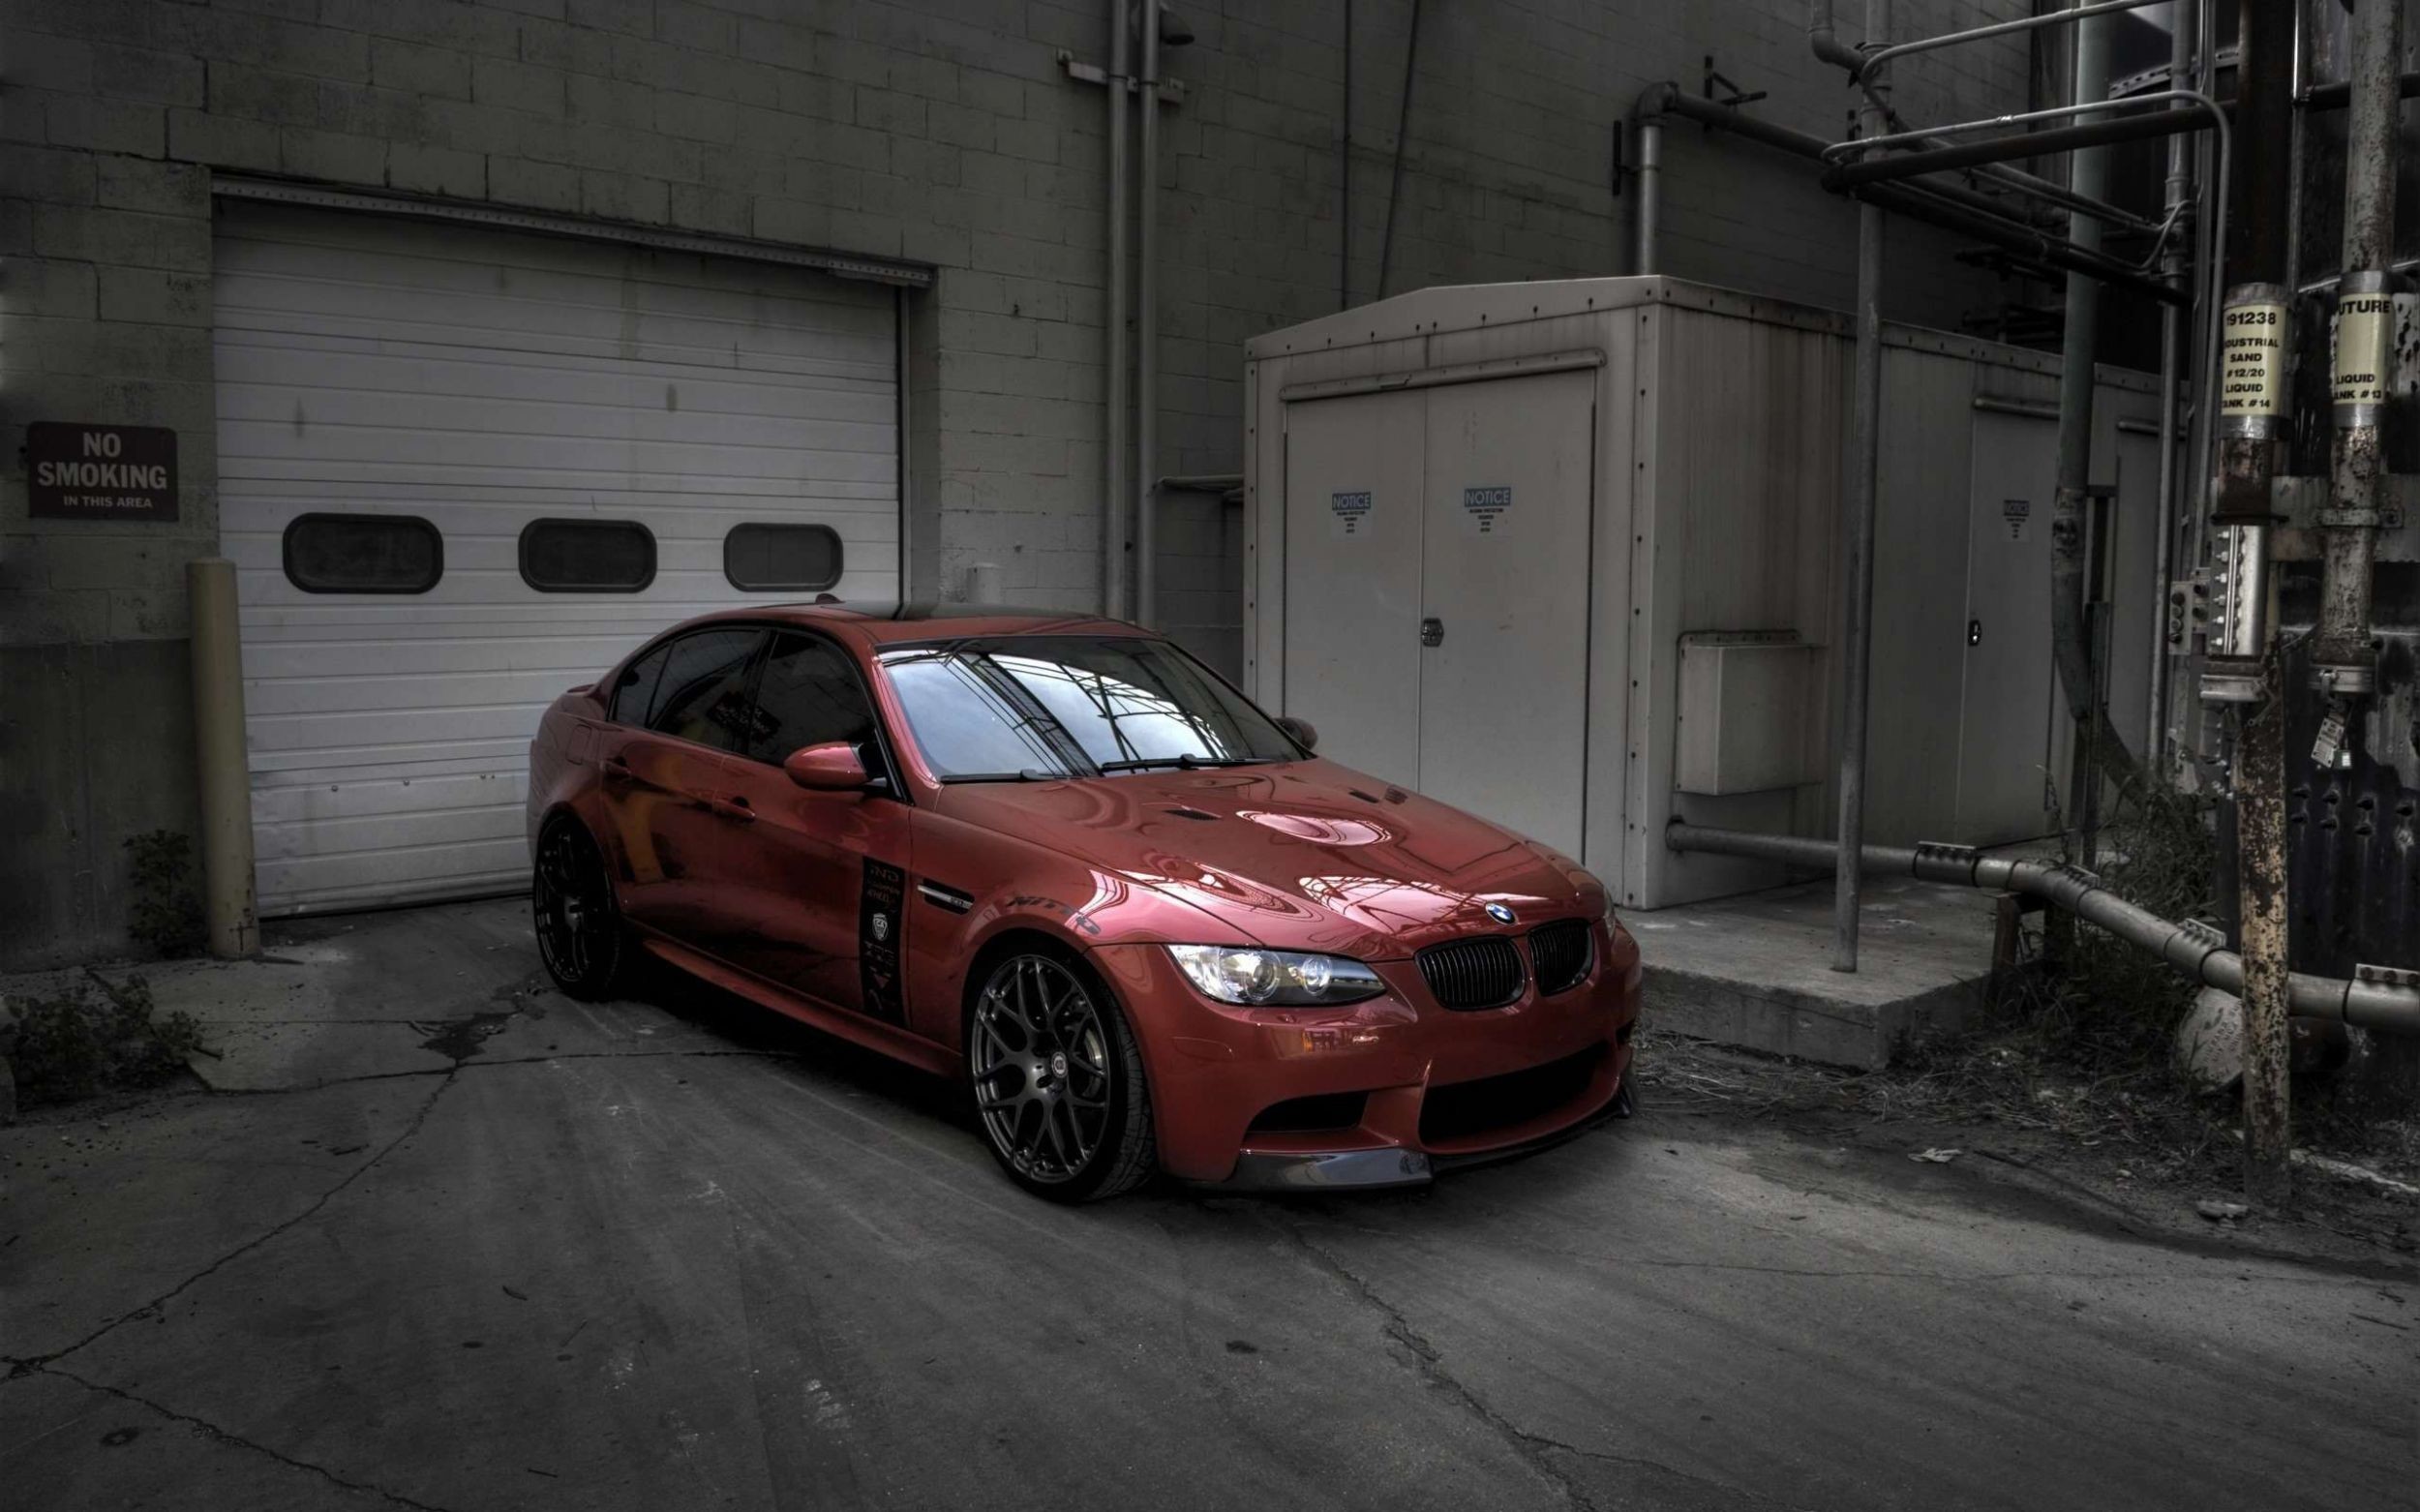 2500x1562 100% Quality BMW M3 HD Wallpapers, 2560x1600 px for mobile and desktop